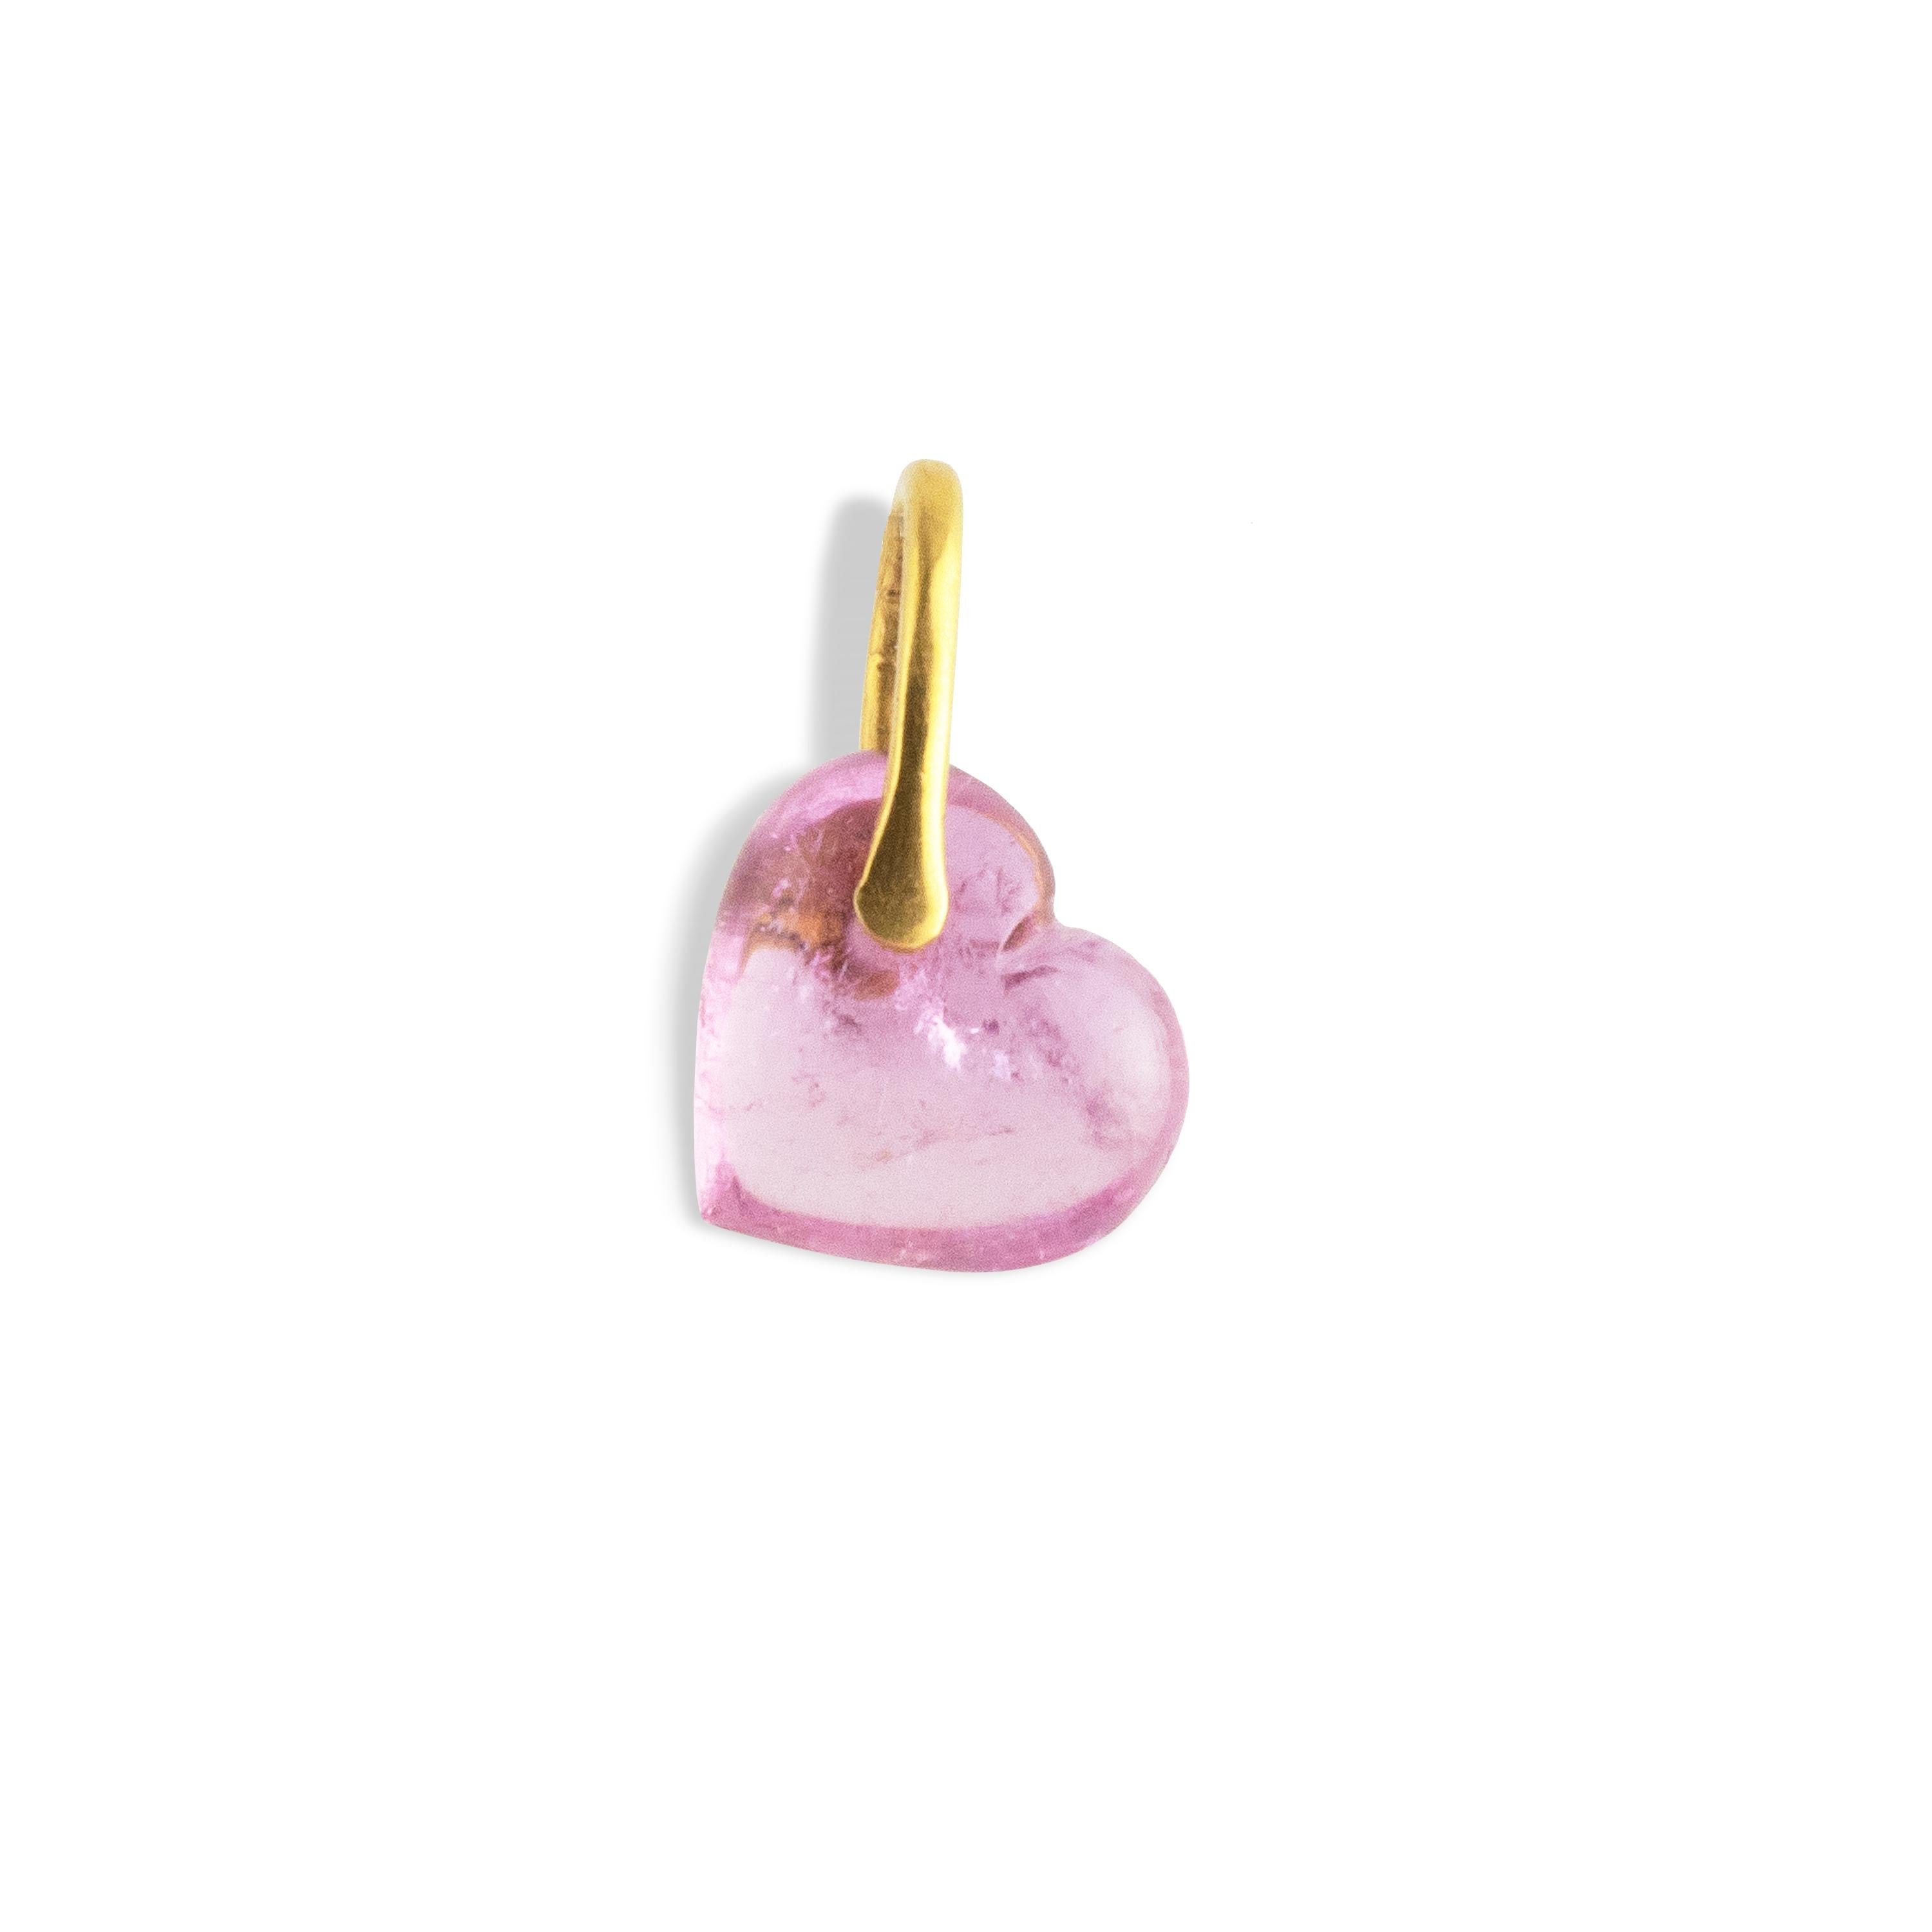 This  12mm pink tourmaline puffy heart pendant is hand carved and set with a 22k gold bale.   Measures 17mm x 11mm x 5mm.
Hand carved in Jaipur, India.

Pink Tourmaline is a stone of love, compassion, emotional healing and self love.  Tourmaline is